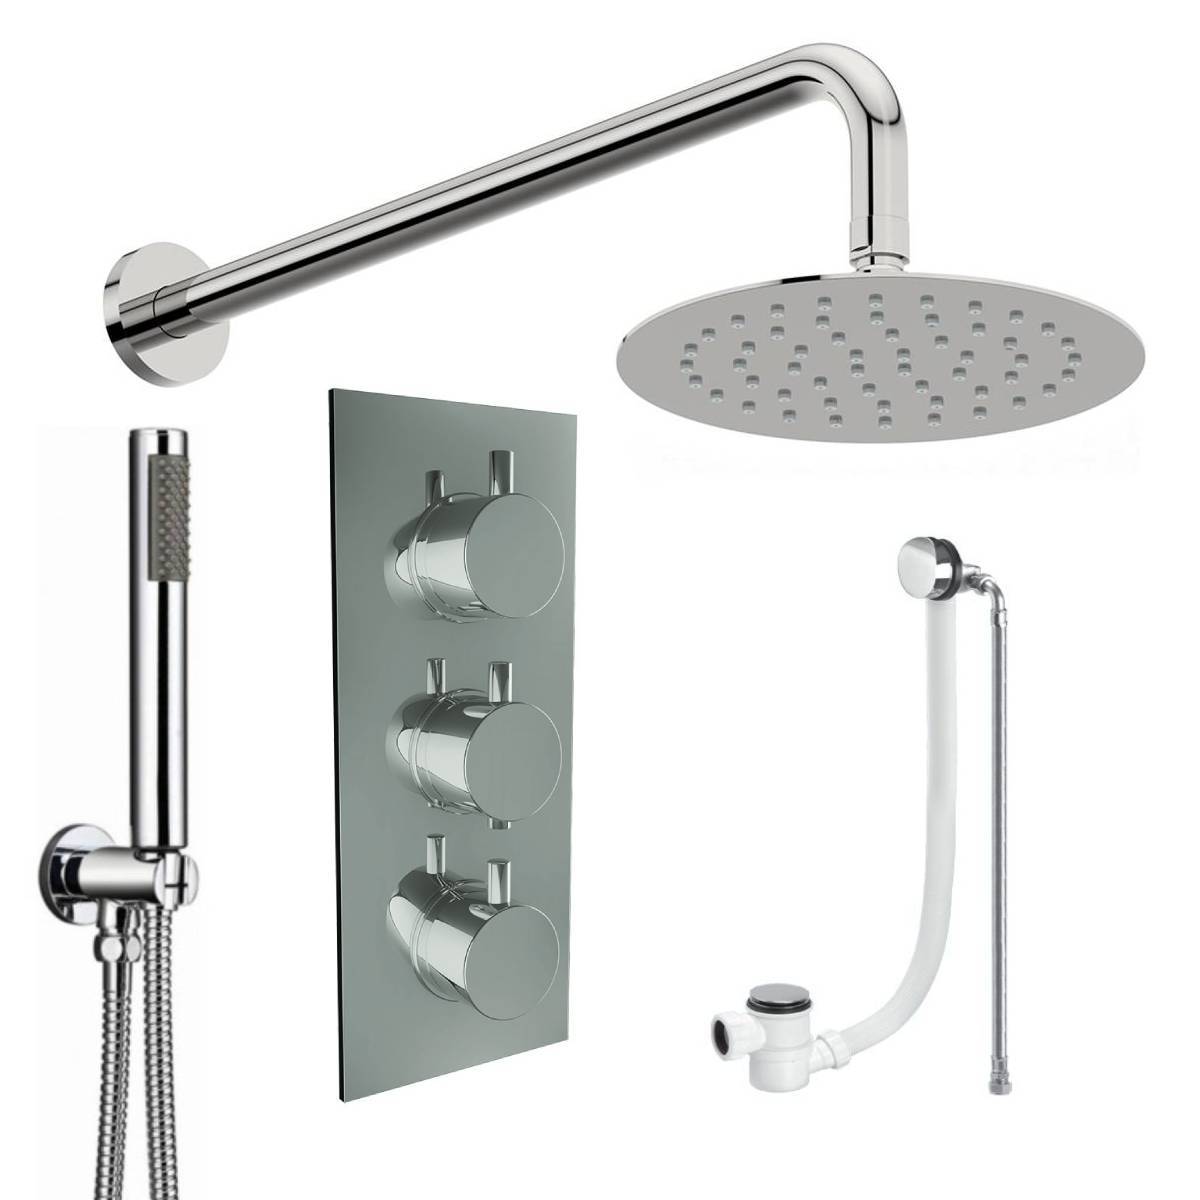 Round Triple Thermostatic Concealed Mixer Shower Kit with Wall Mounted 300mm Shower Head, Handset & Overflow Filler (12471)